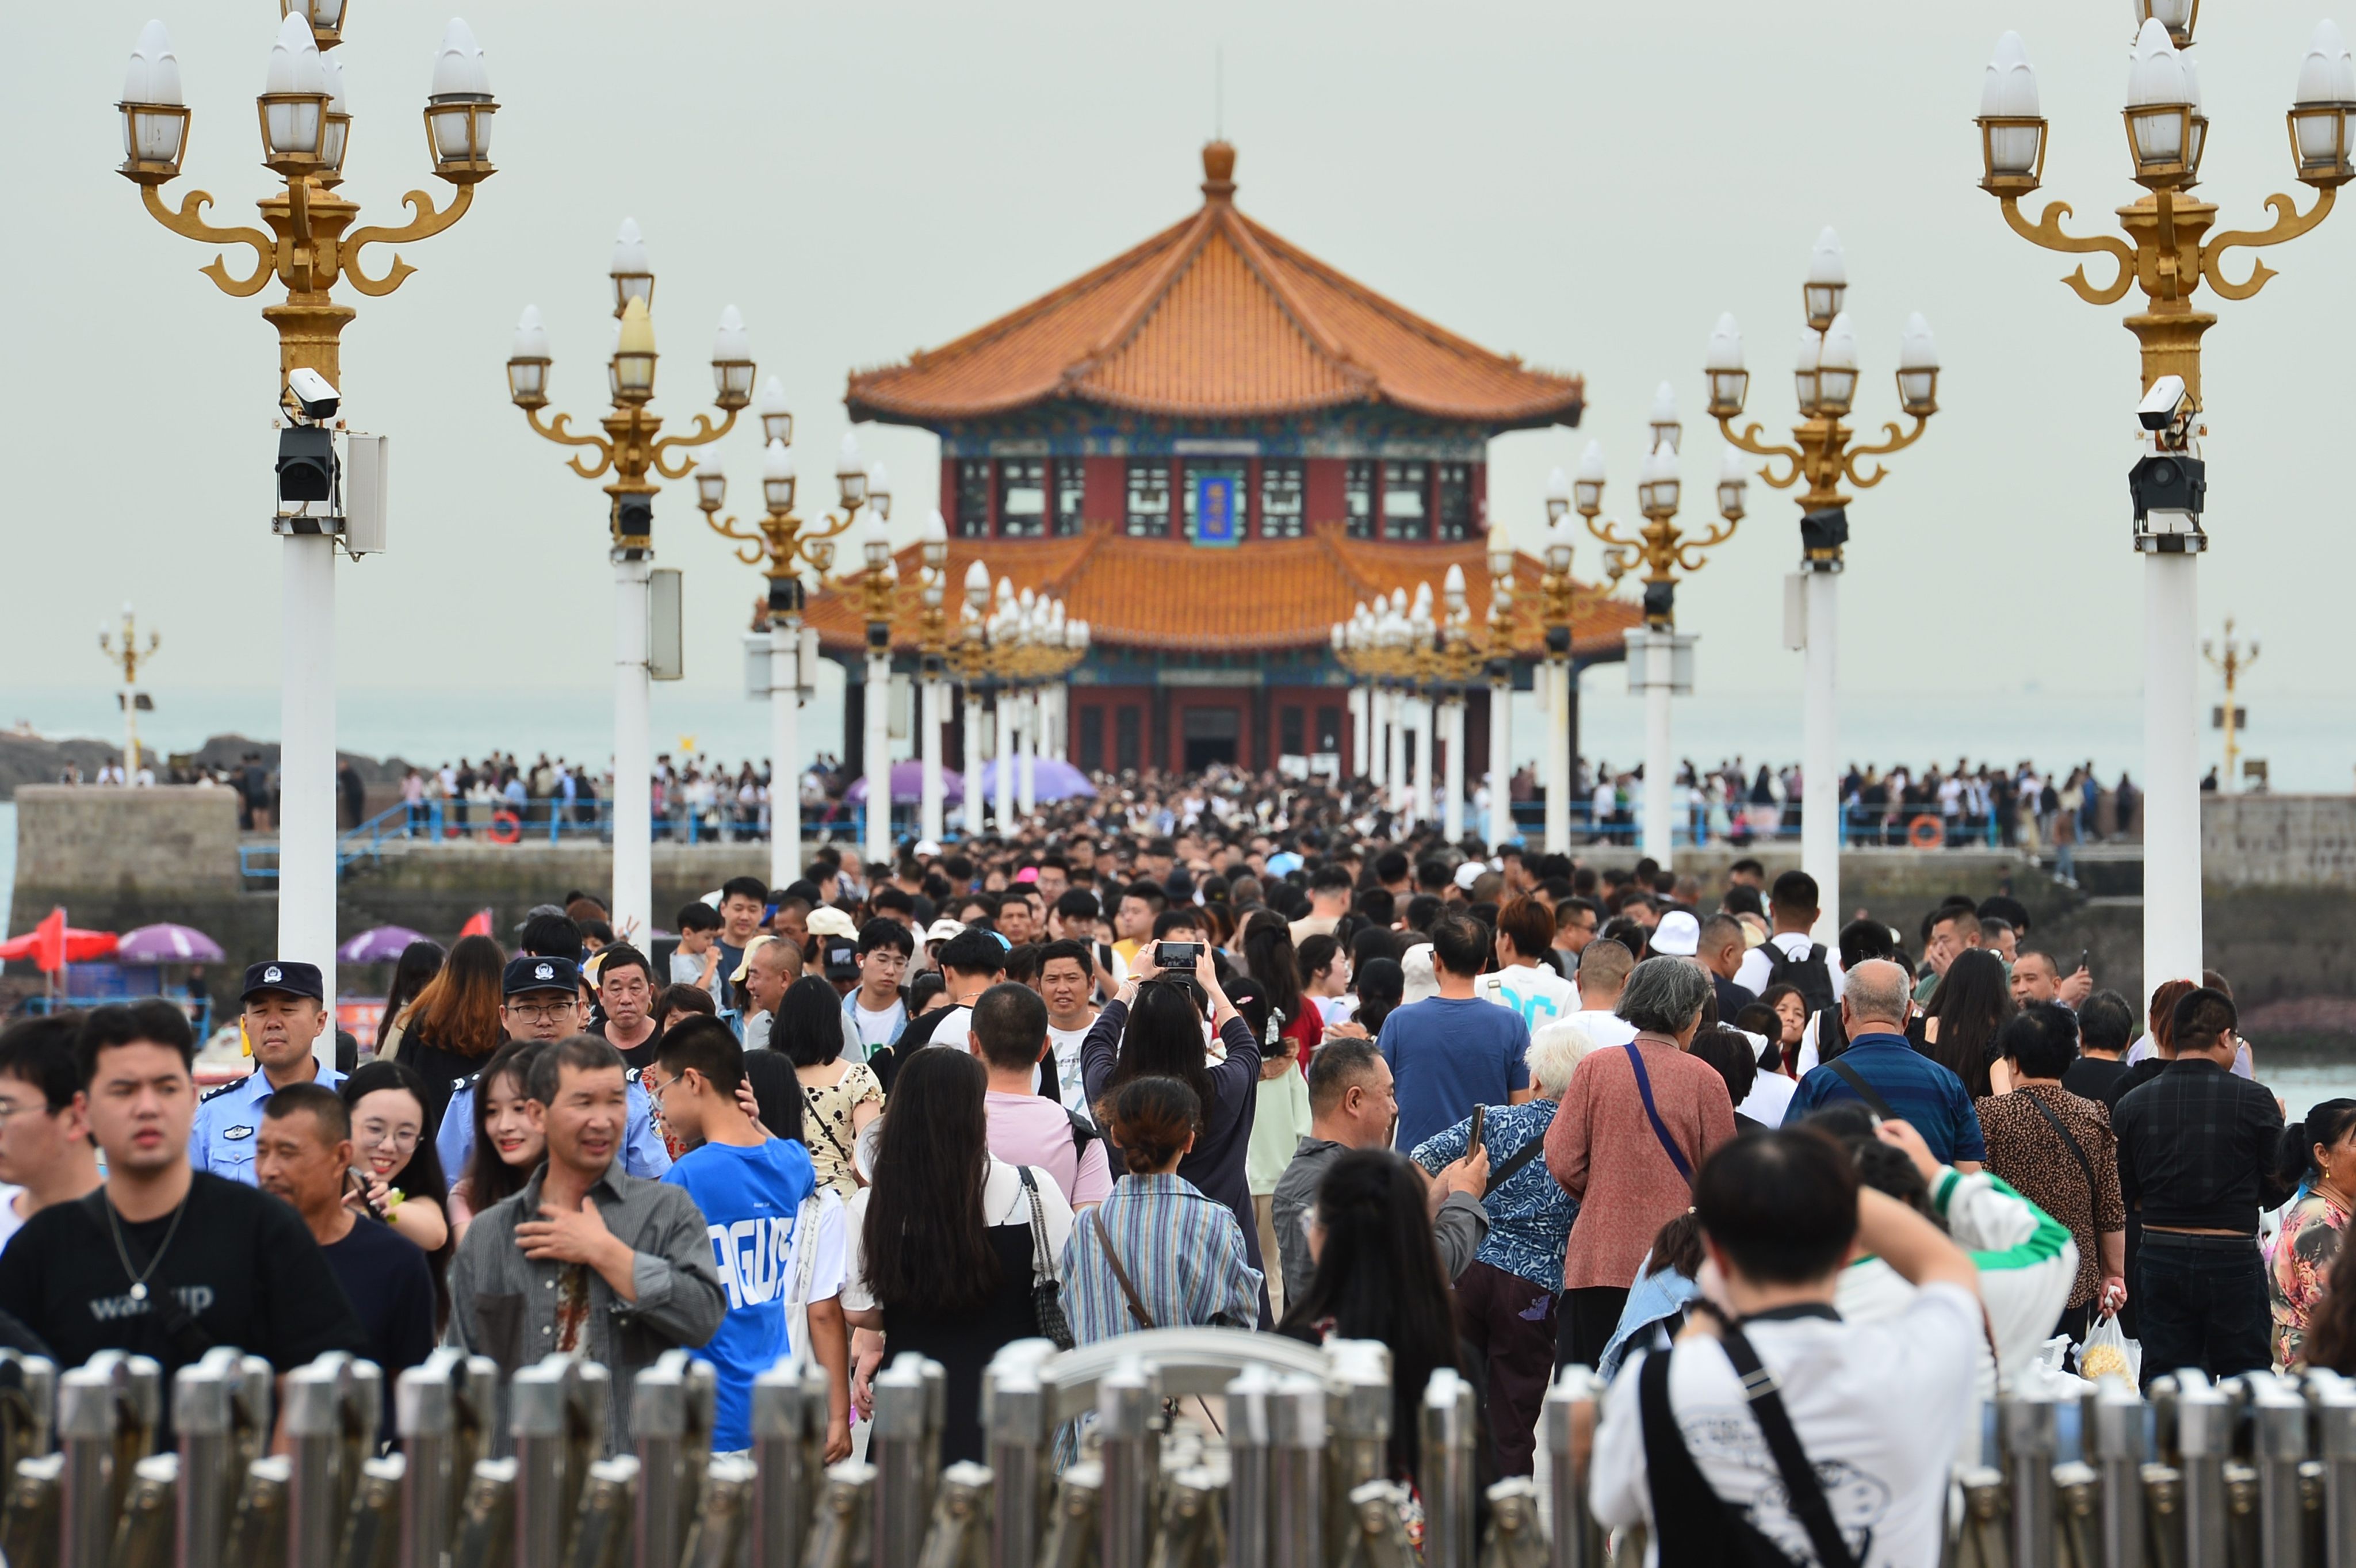 People visit the Zhanqiao bridge in Qingdao in east China’s Shandong province on September 29. China is using the market economy to build a modern economy and society. Photo: Xinhua